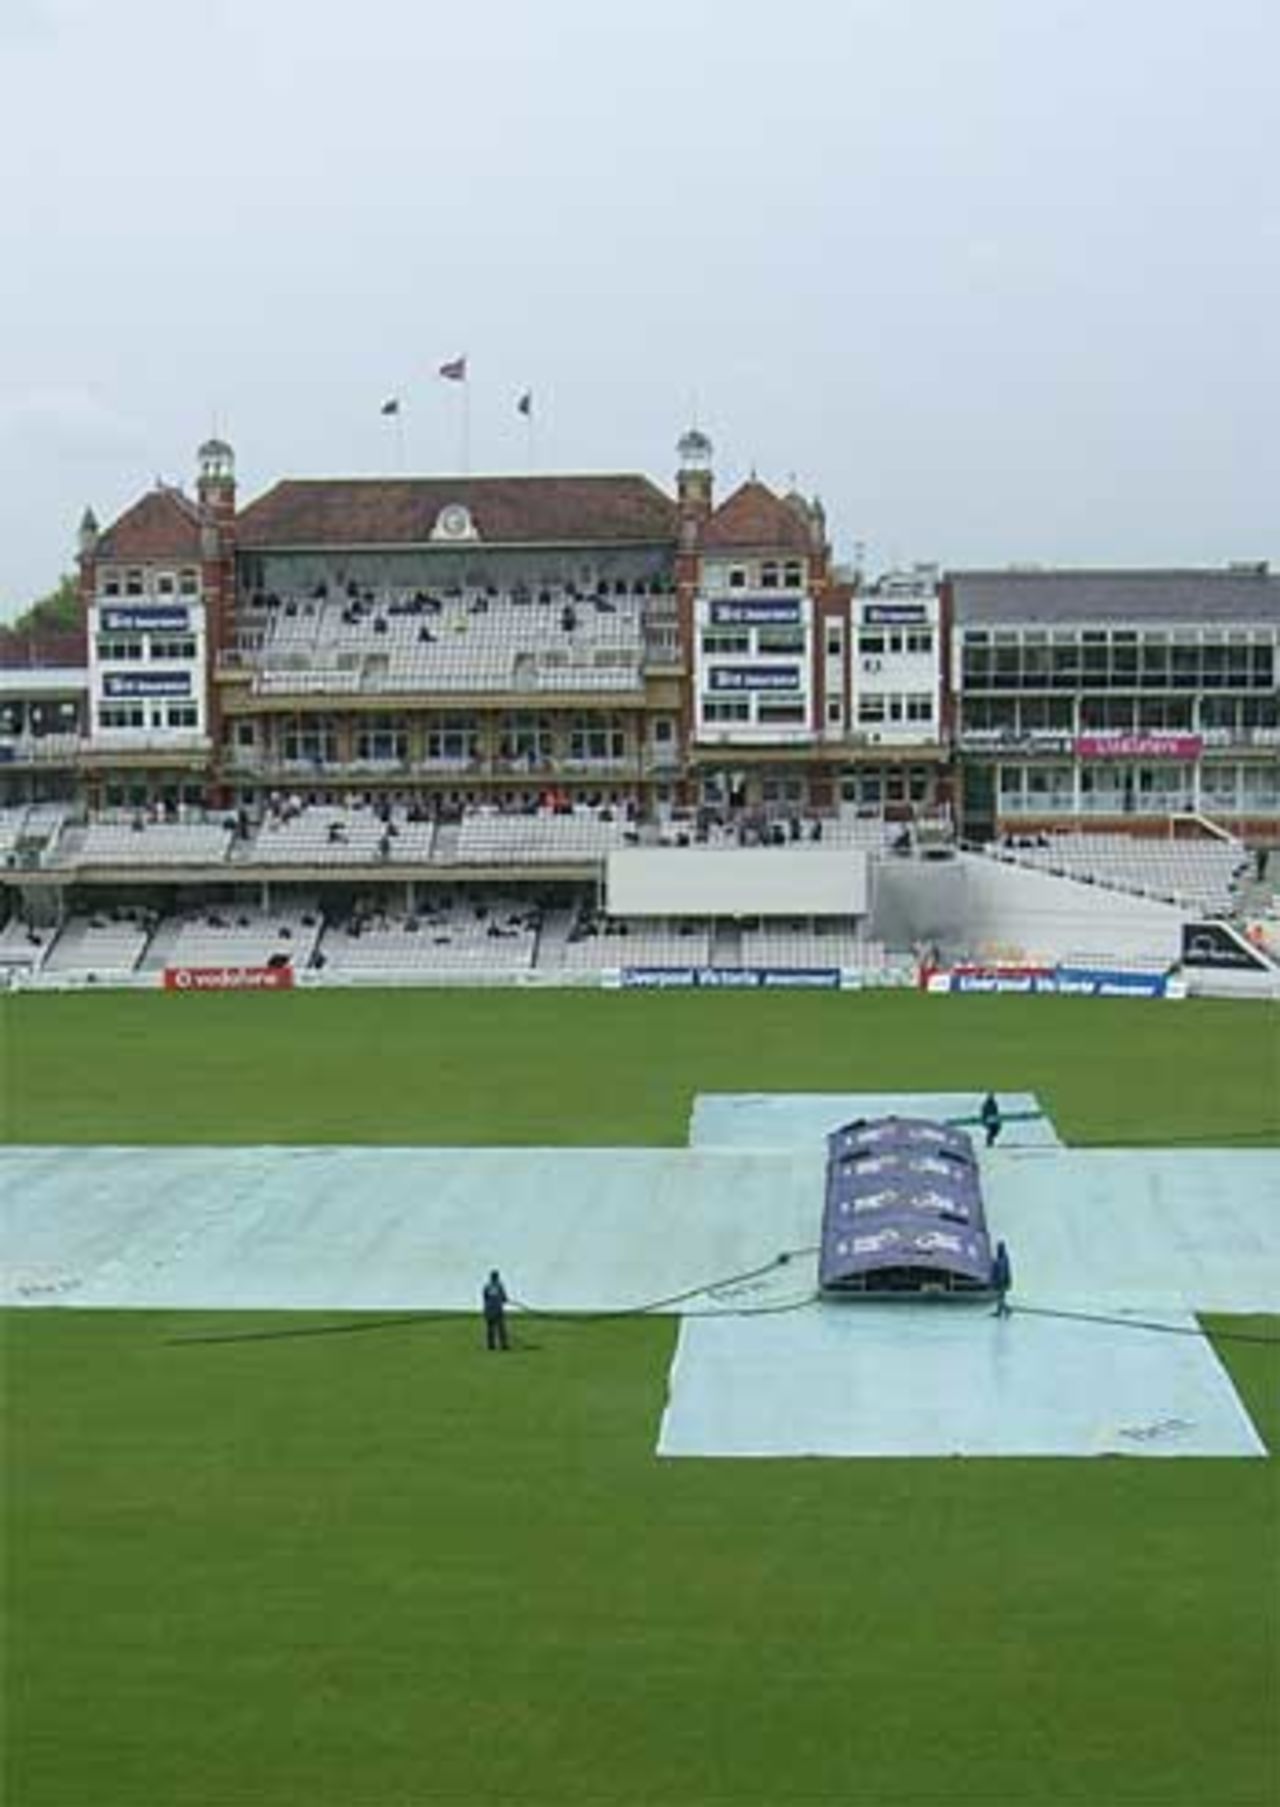 Rain washes out play in the afternoon, Surrey v Worcestershire, Championship, 1st day, May 17, 2006